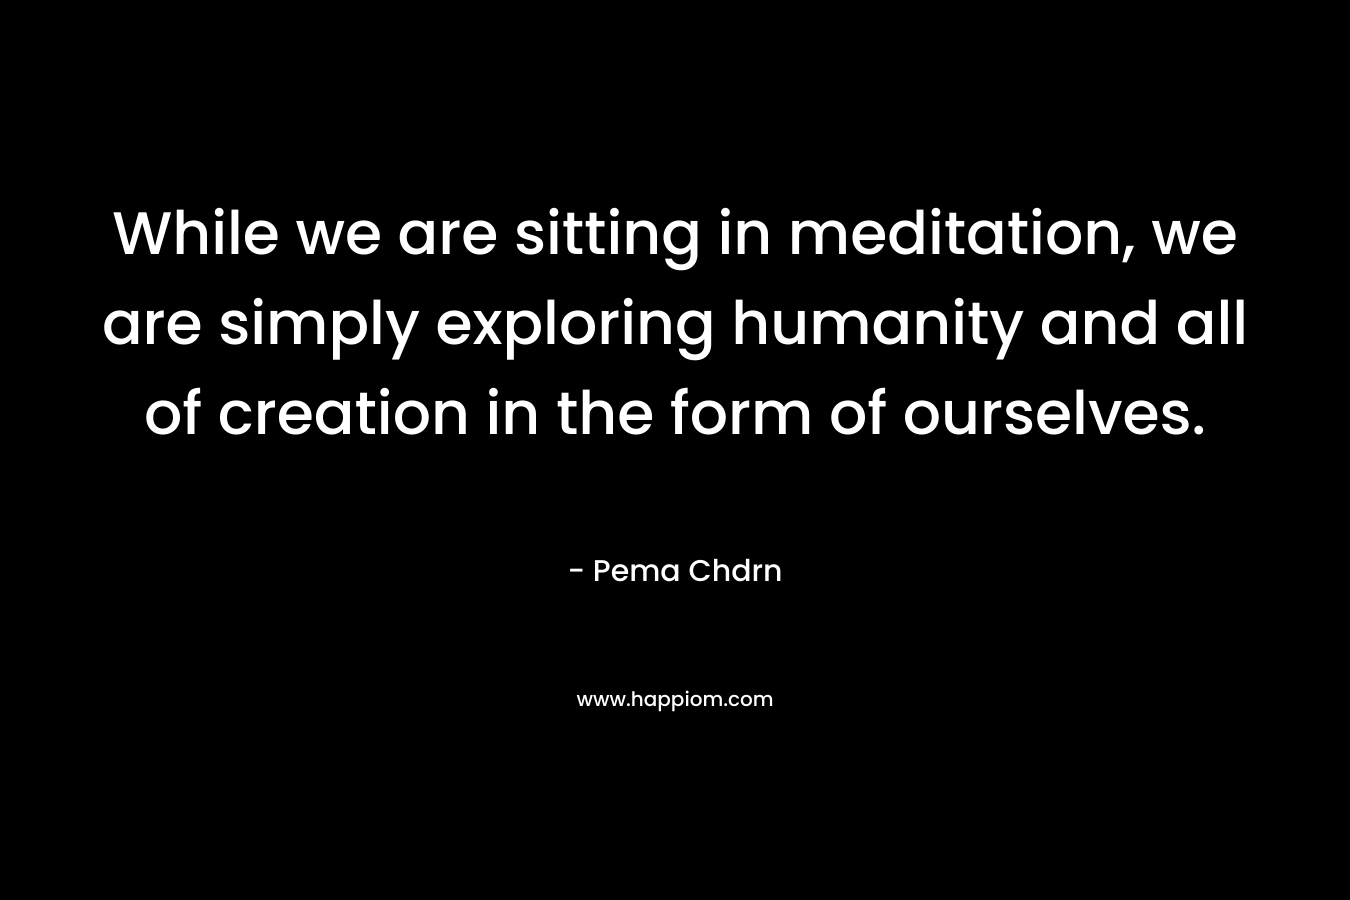 While we are sitting in meditation, we are simply exploring humanity and all of creation in the form of ourselves.